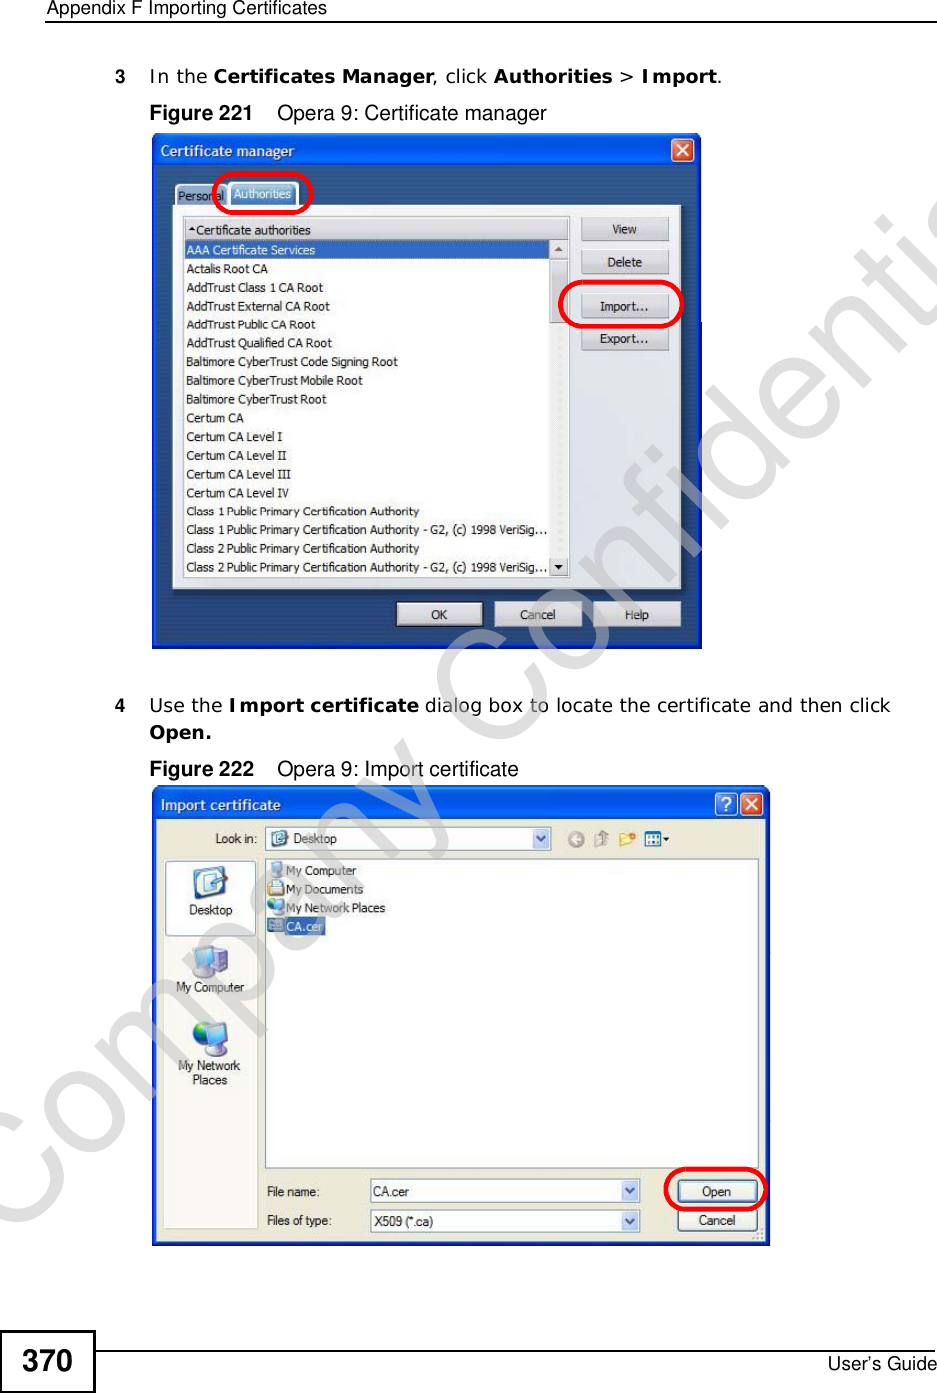 Appendix FImporting CertificatesUser’s Guide3703In the Certificates Manager, click Authorities &gt; Import.Figure 221    Opera 9: Certificate manager4Use the Import certificate dialog box to locate the certificate and then clickOpen.Figure 222    Opera 9: Import certificateCompany Confidential